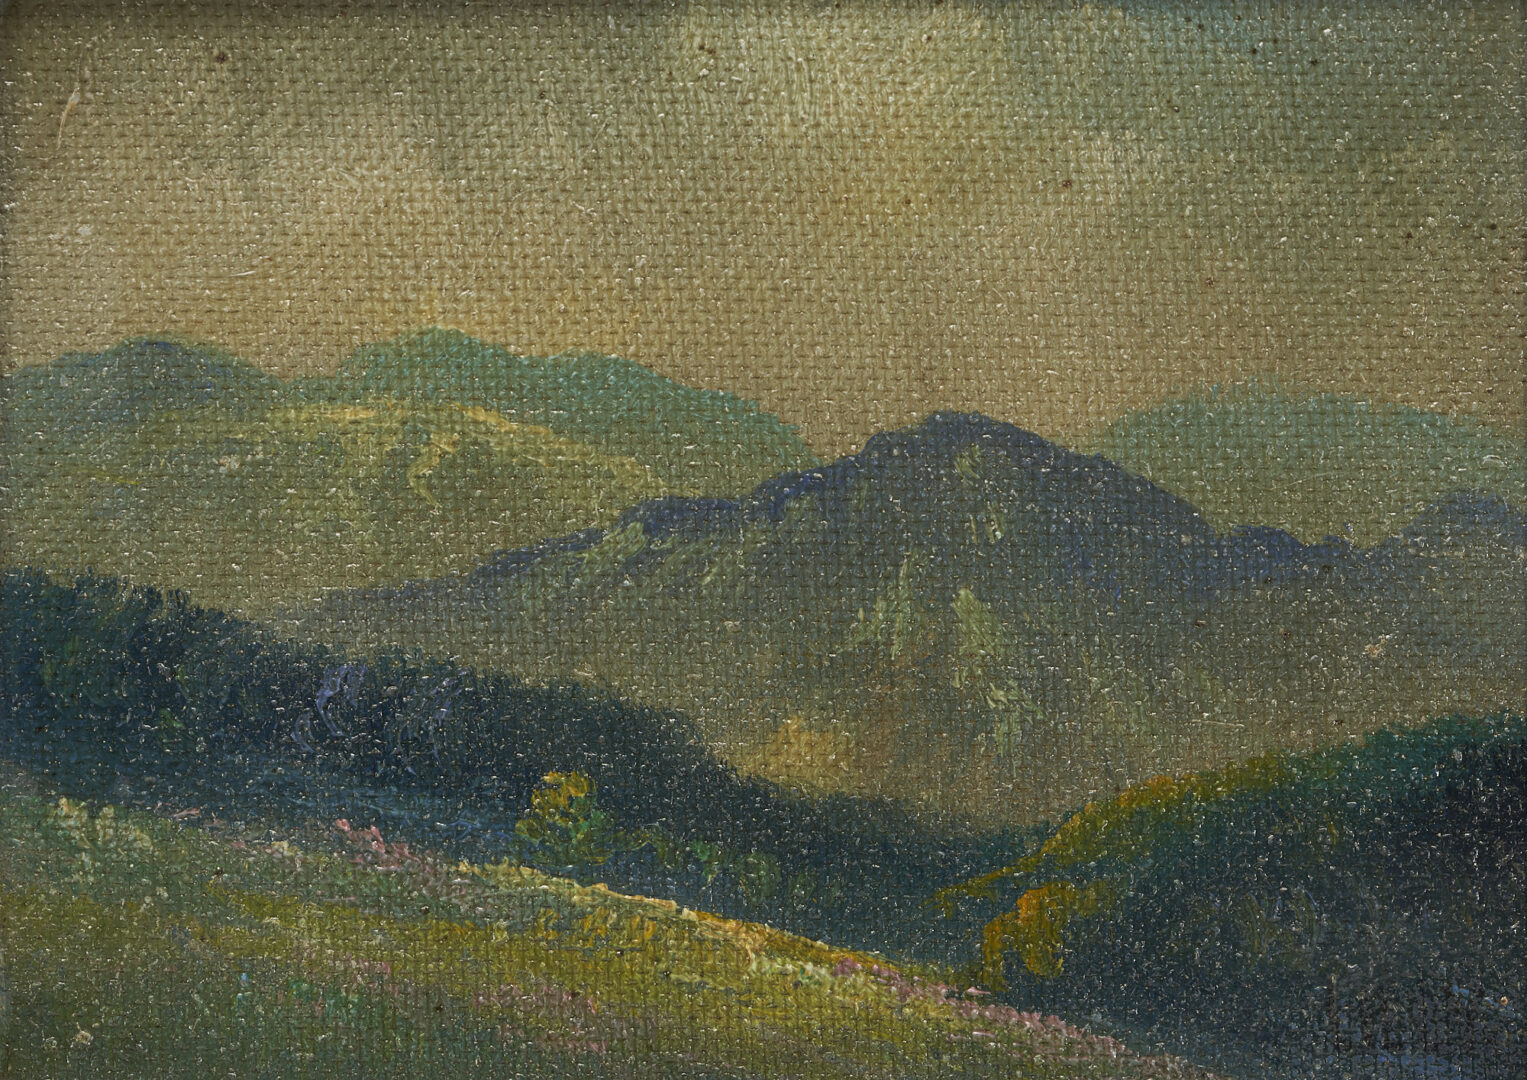 Lot 12: Small Smoky Mountains Landscape Oil, Manner of Louis Jones